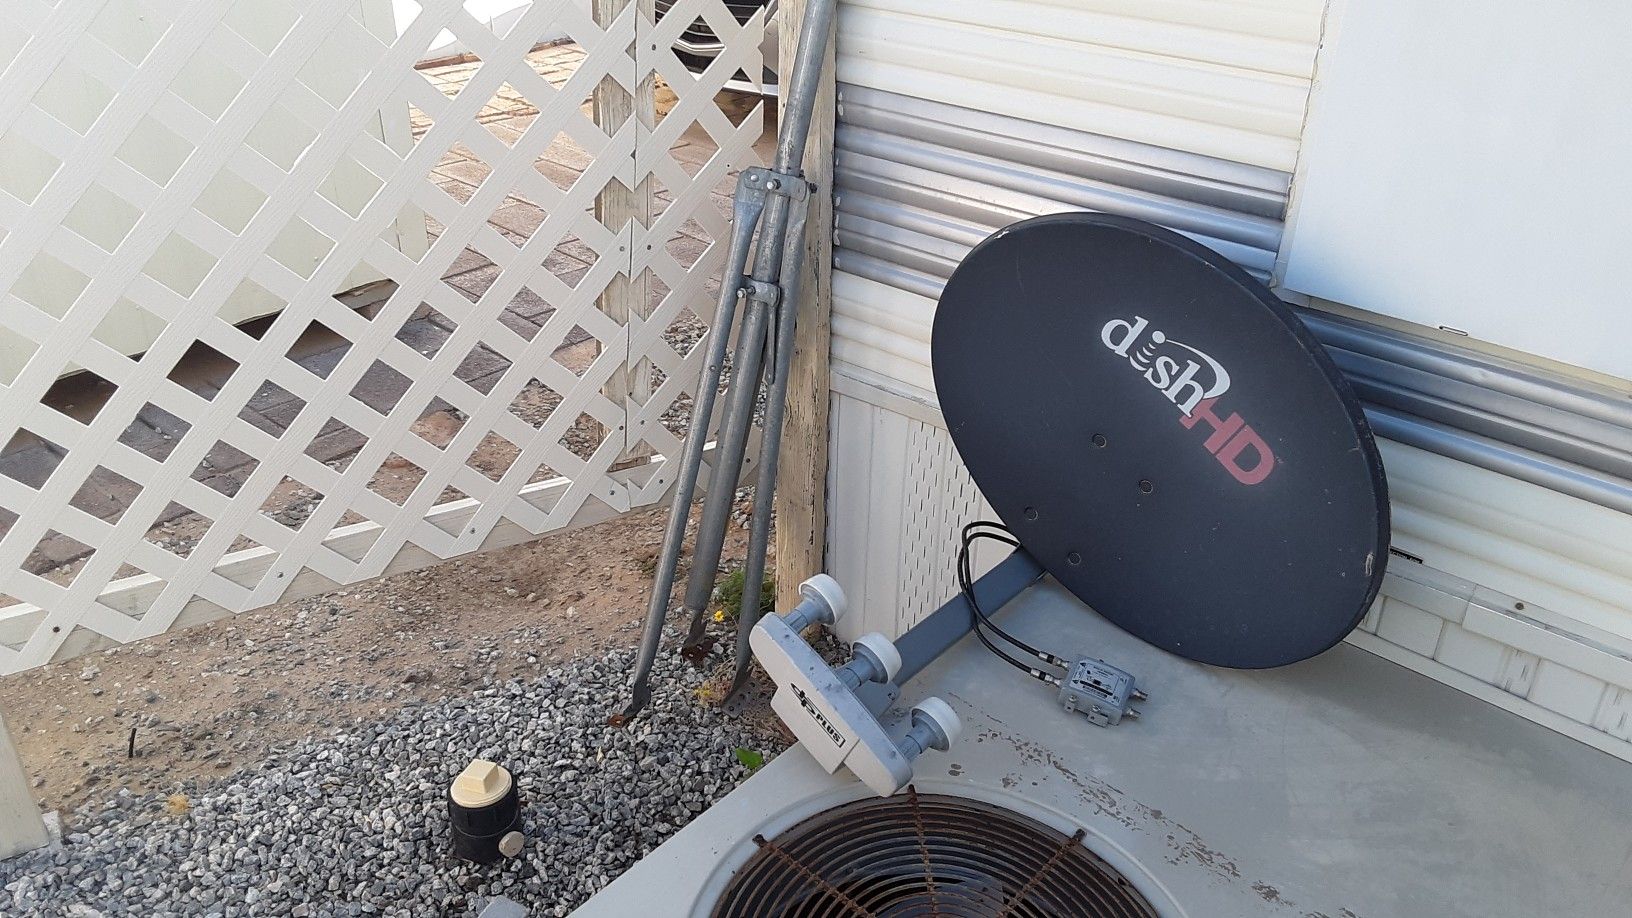 Satilite.hd dish with stand